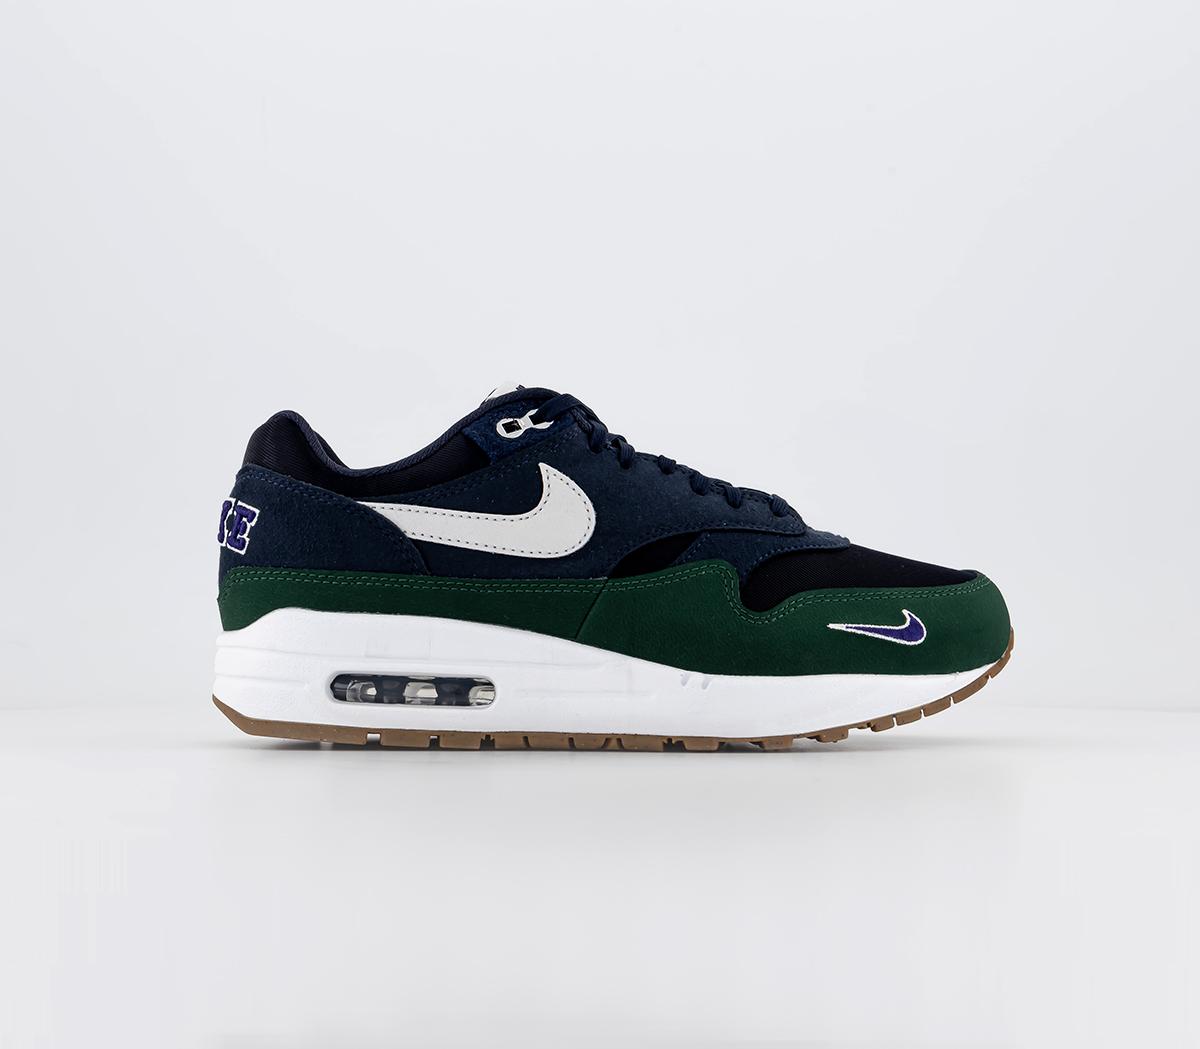 Nike Max 1 Trainers Obsidian White Navy Gorge - Women's Trainers